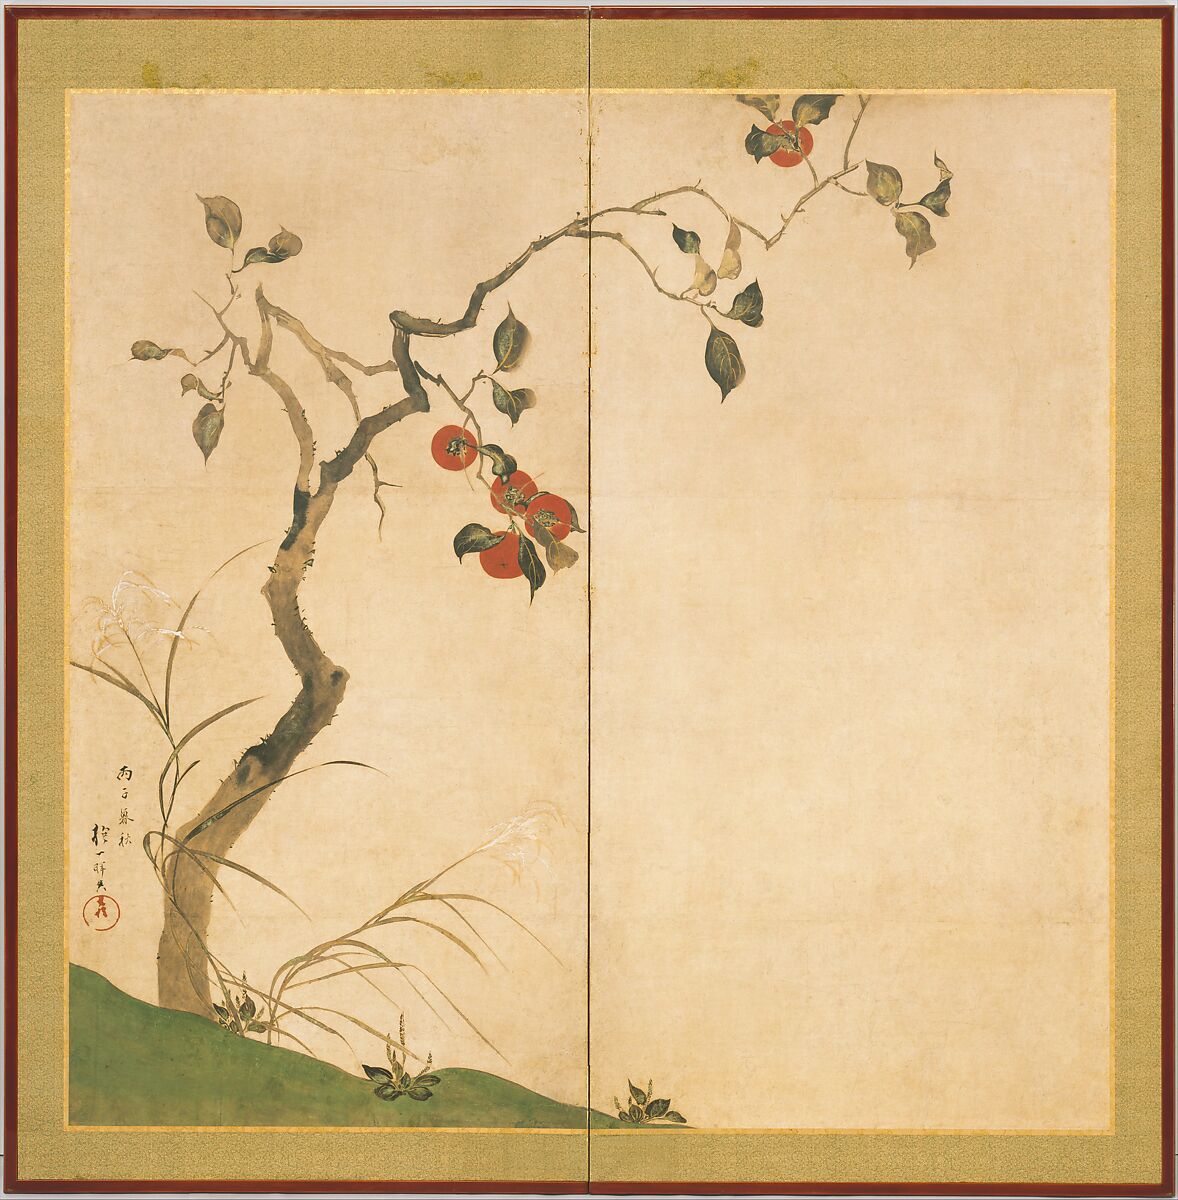 Persimmon Tree, Sakai Hōitsu (Japanese, 1761–1828), Two-panel folding screen; ink and color on paper, Japan 